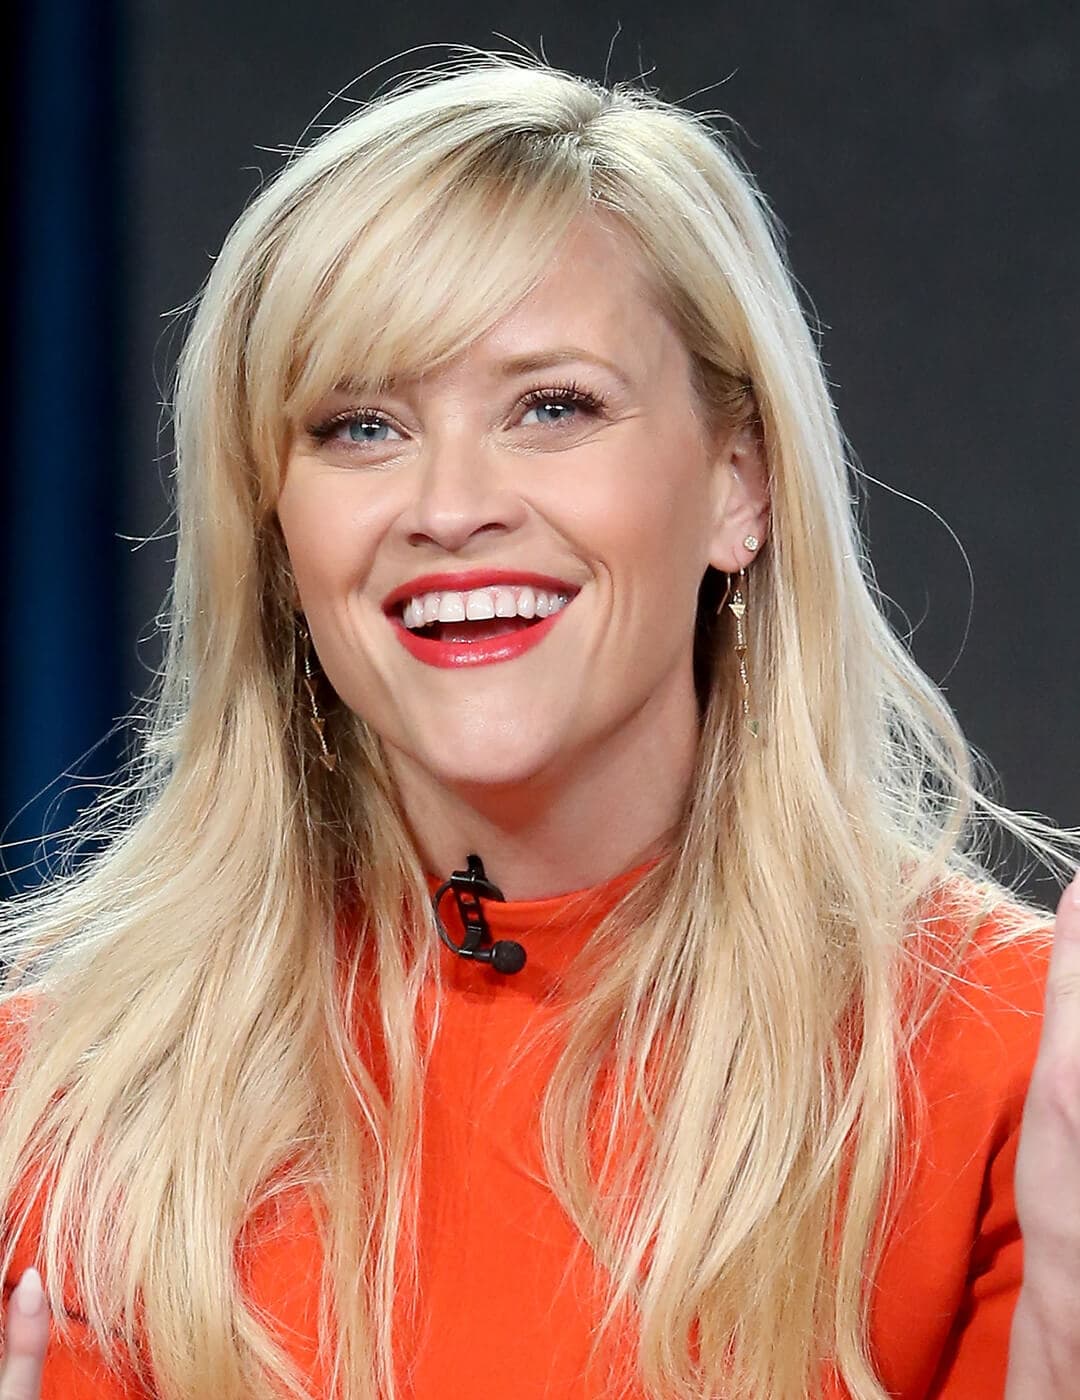 Smiling Reese Witherspoon rocking an orange dress and warm makeup look